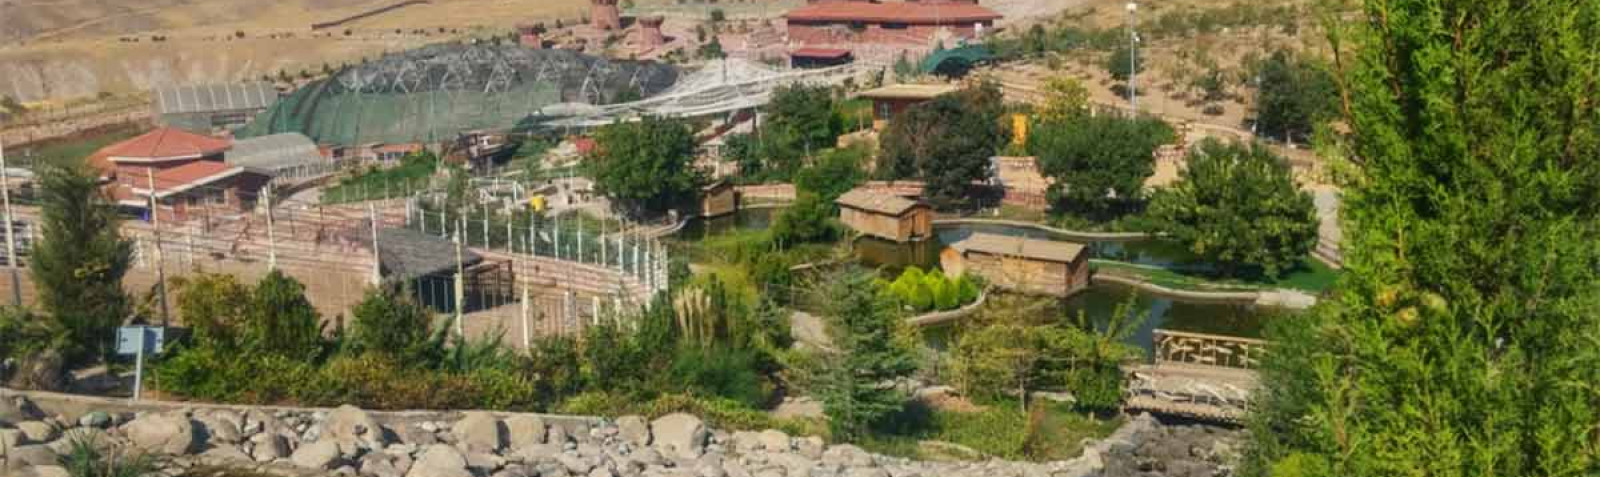 Nature Village of Qazvin: Like no Other Zoo